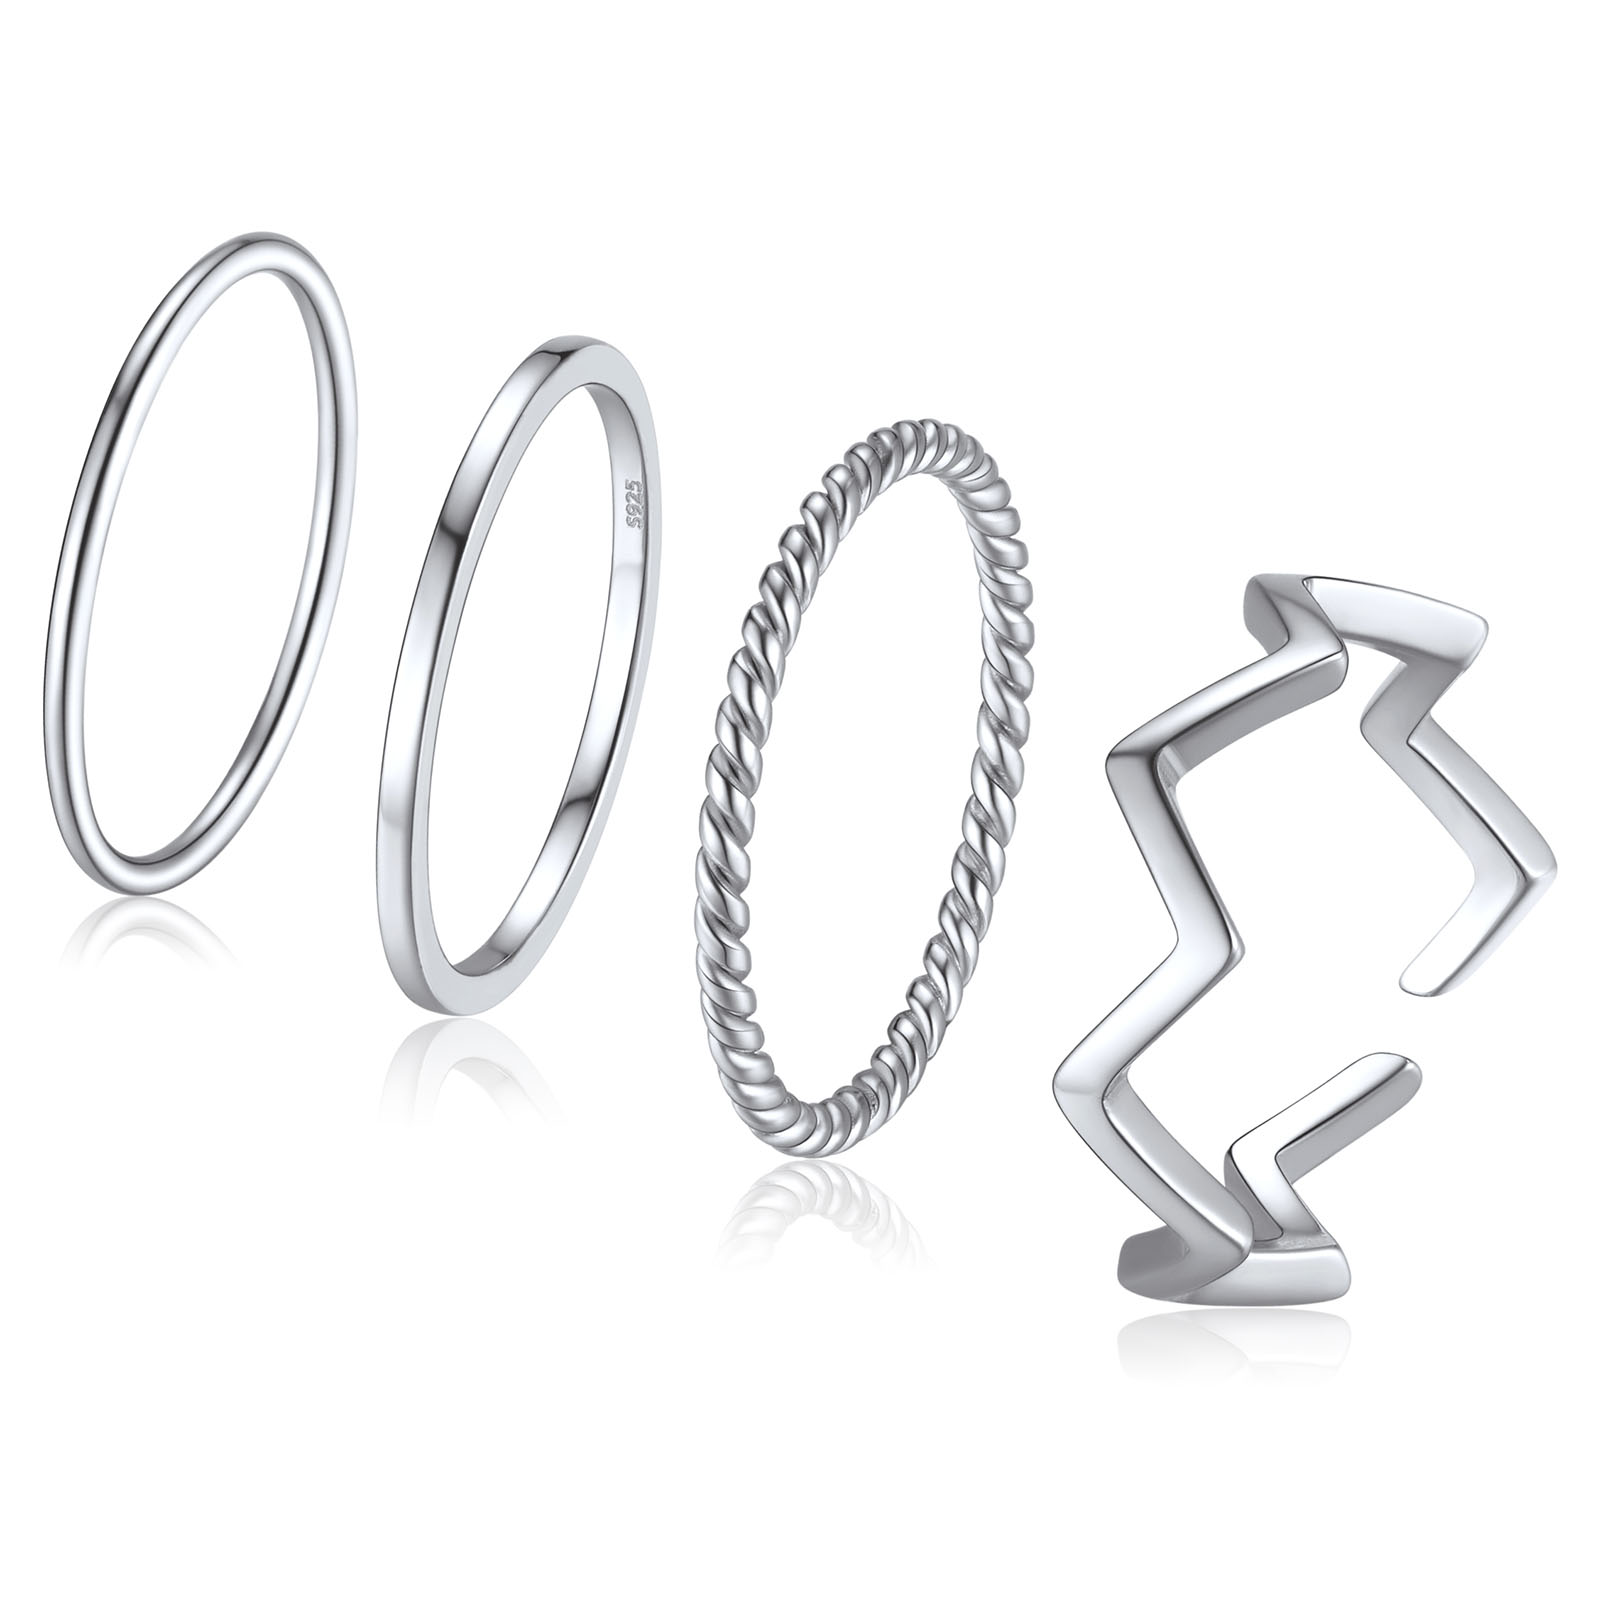 Stackling Ring Set For Women Sterling Silver